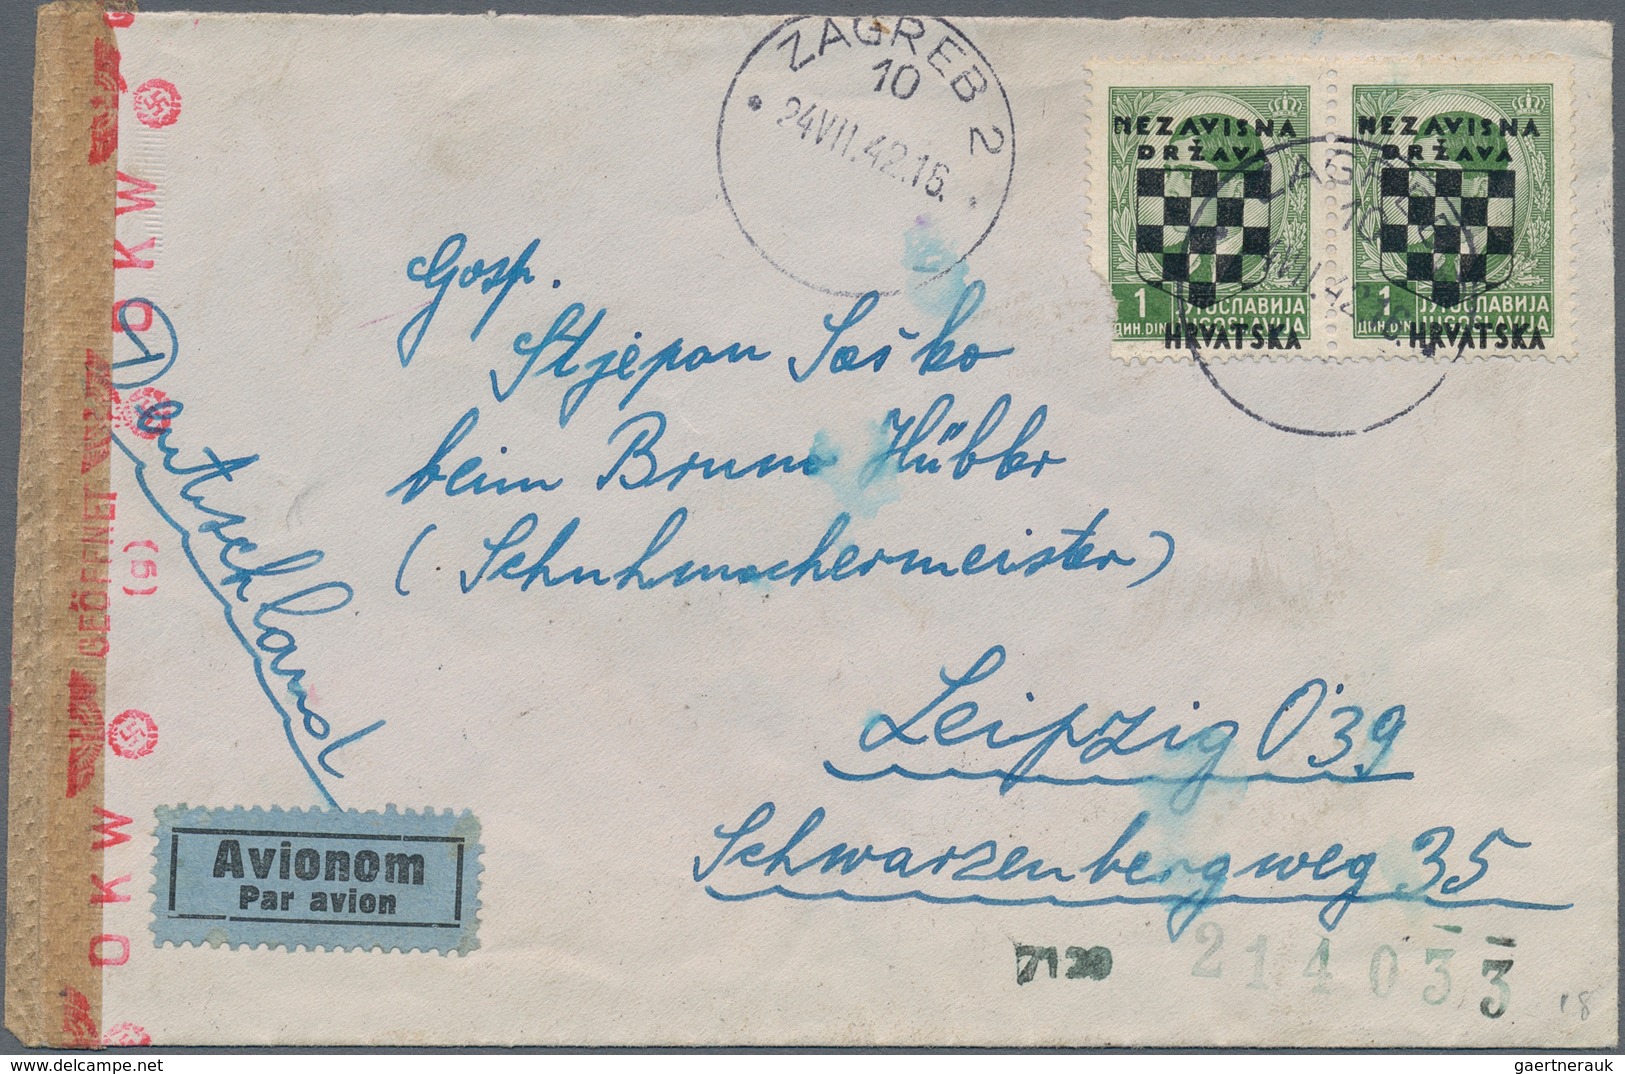 Kroatien: 1941/1944, collection of apprx. 60 commercial covers showing a nice range of interesting f